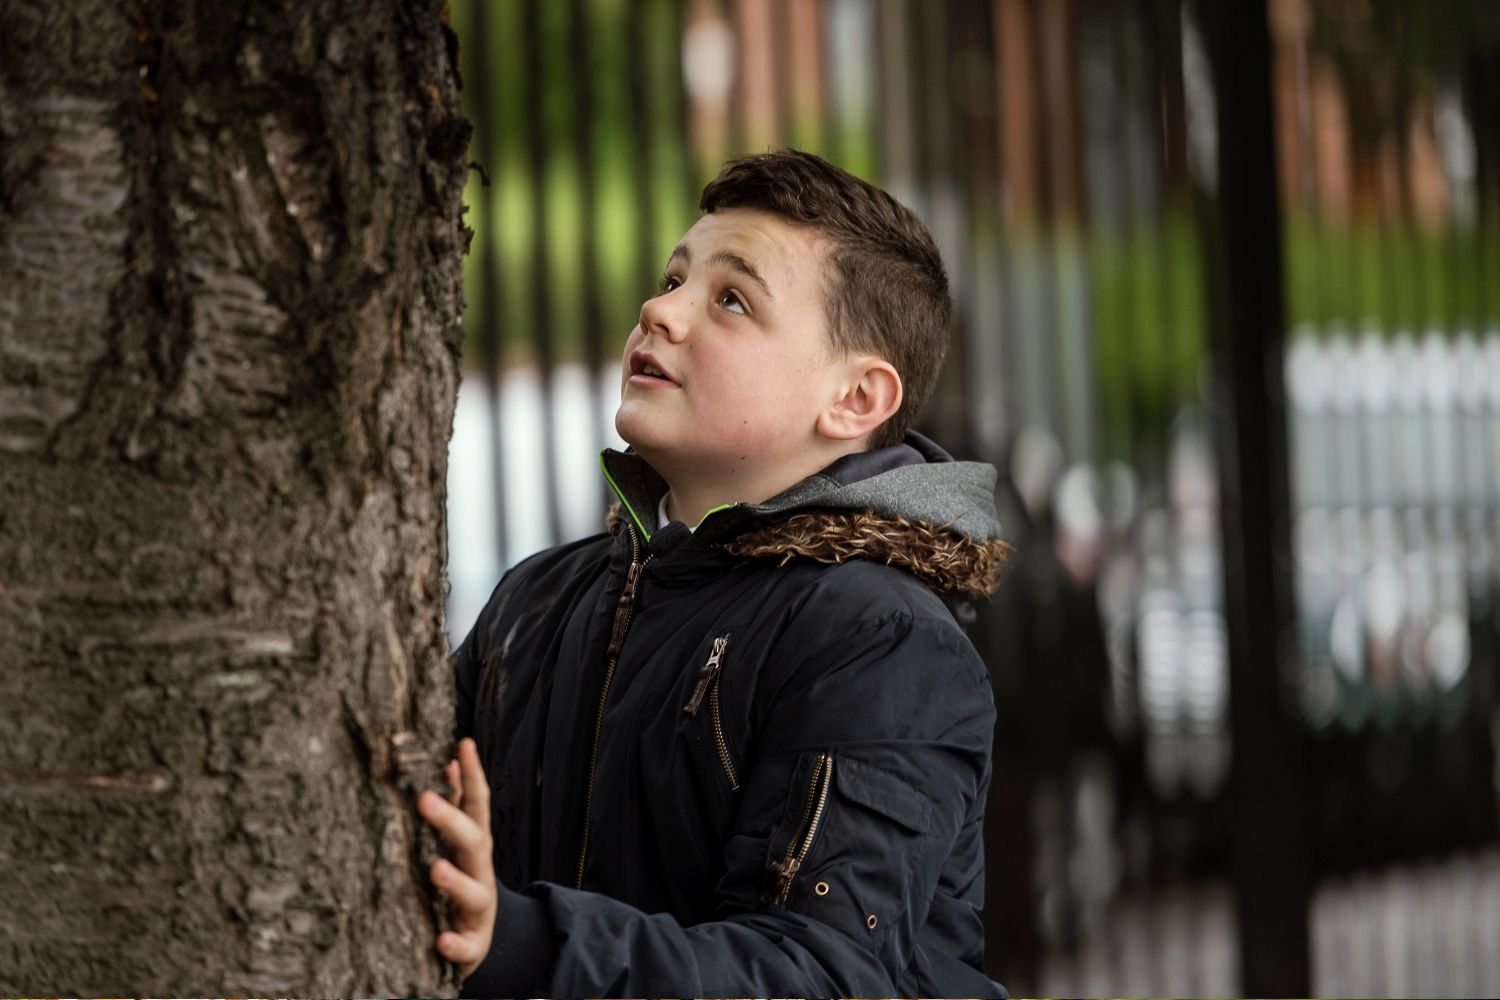 A boy examining a tree trunk during his lesson on climate change and sustainability.